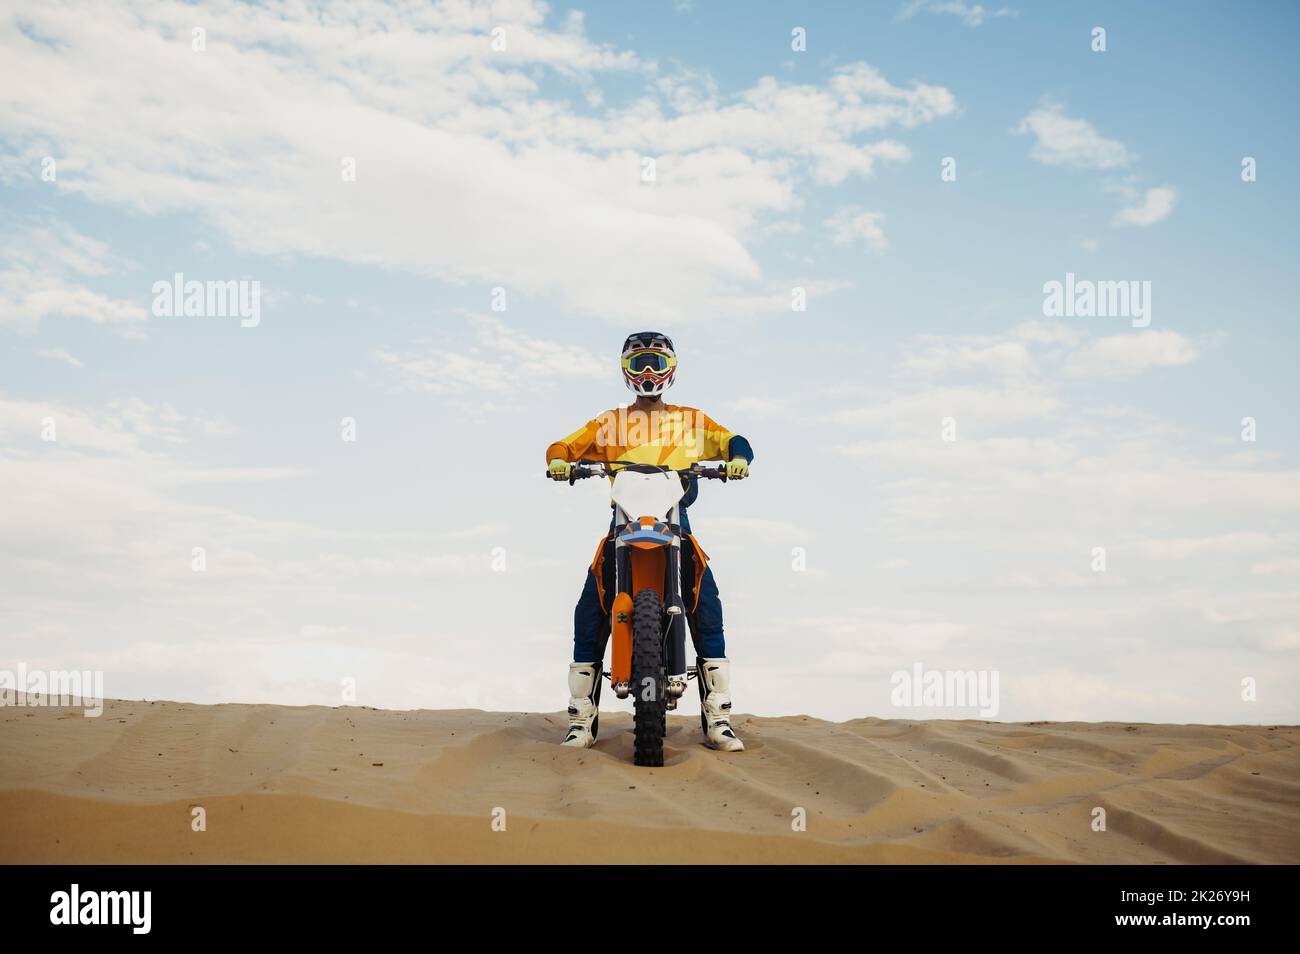 Motorcross rider with raised hand front view Stock Photo